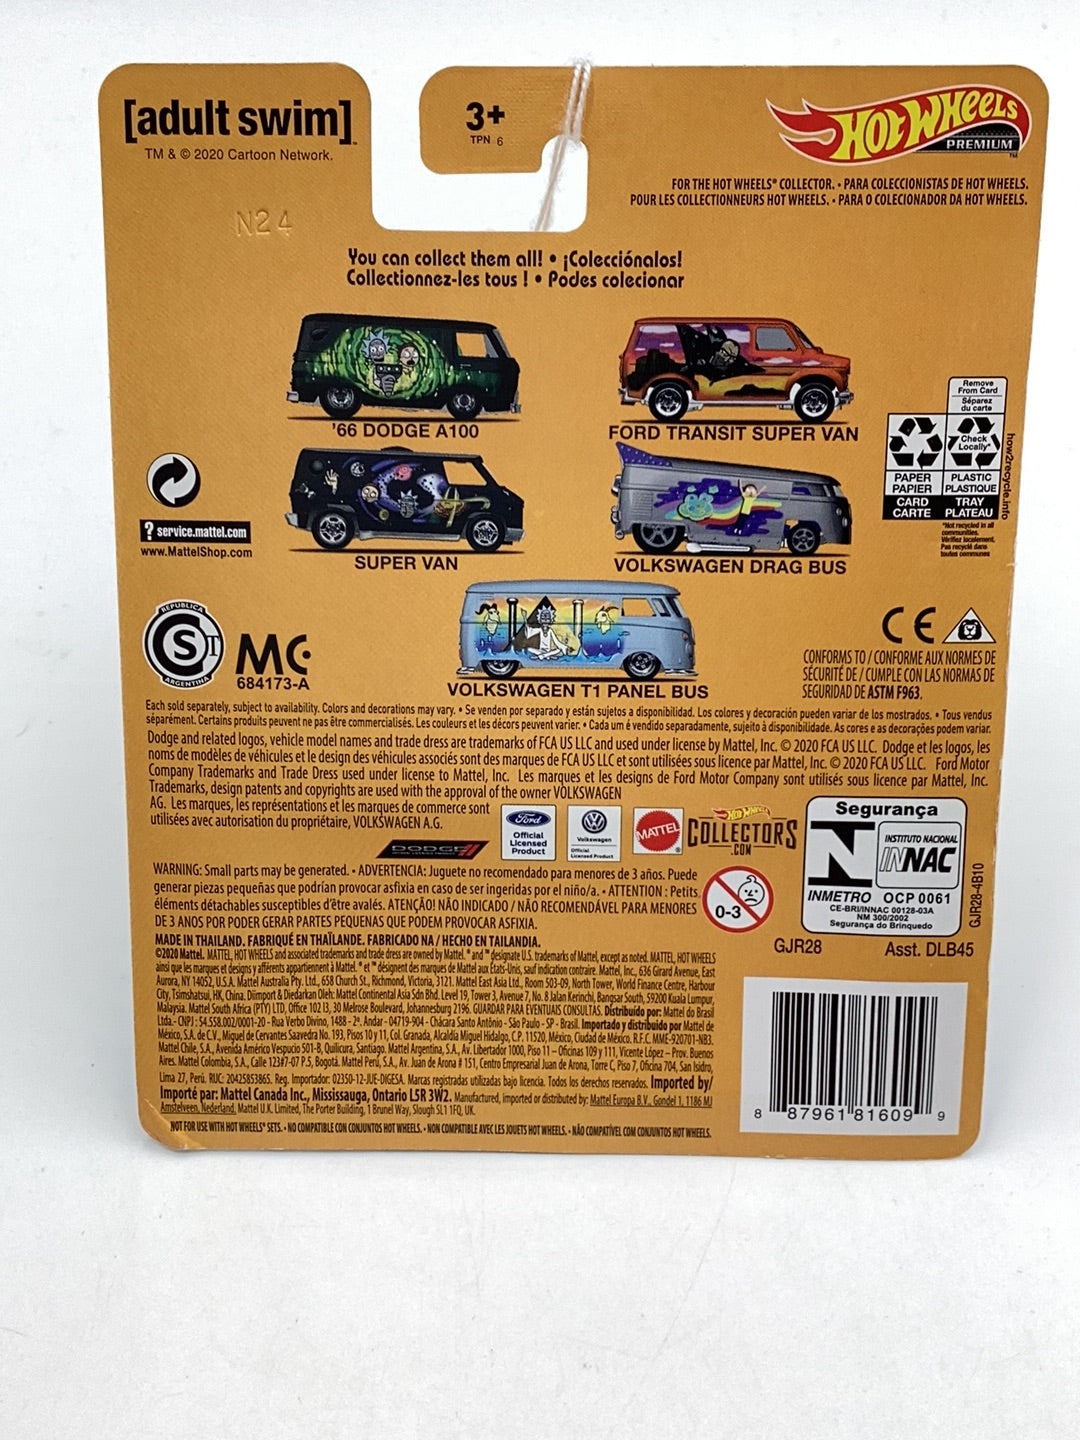 Hot wheels pop culture Rick and Morty 5/5 Volkswagen T1 Panel Bus has crease on card 269G